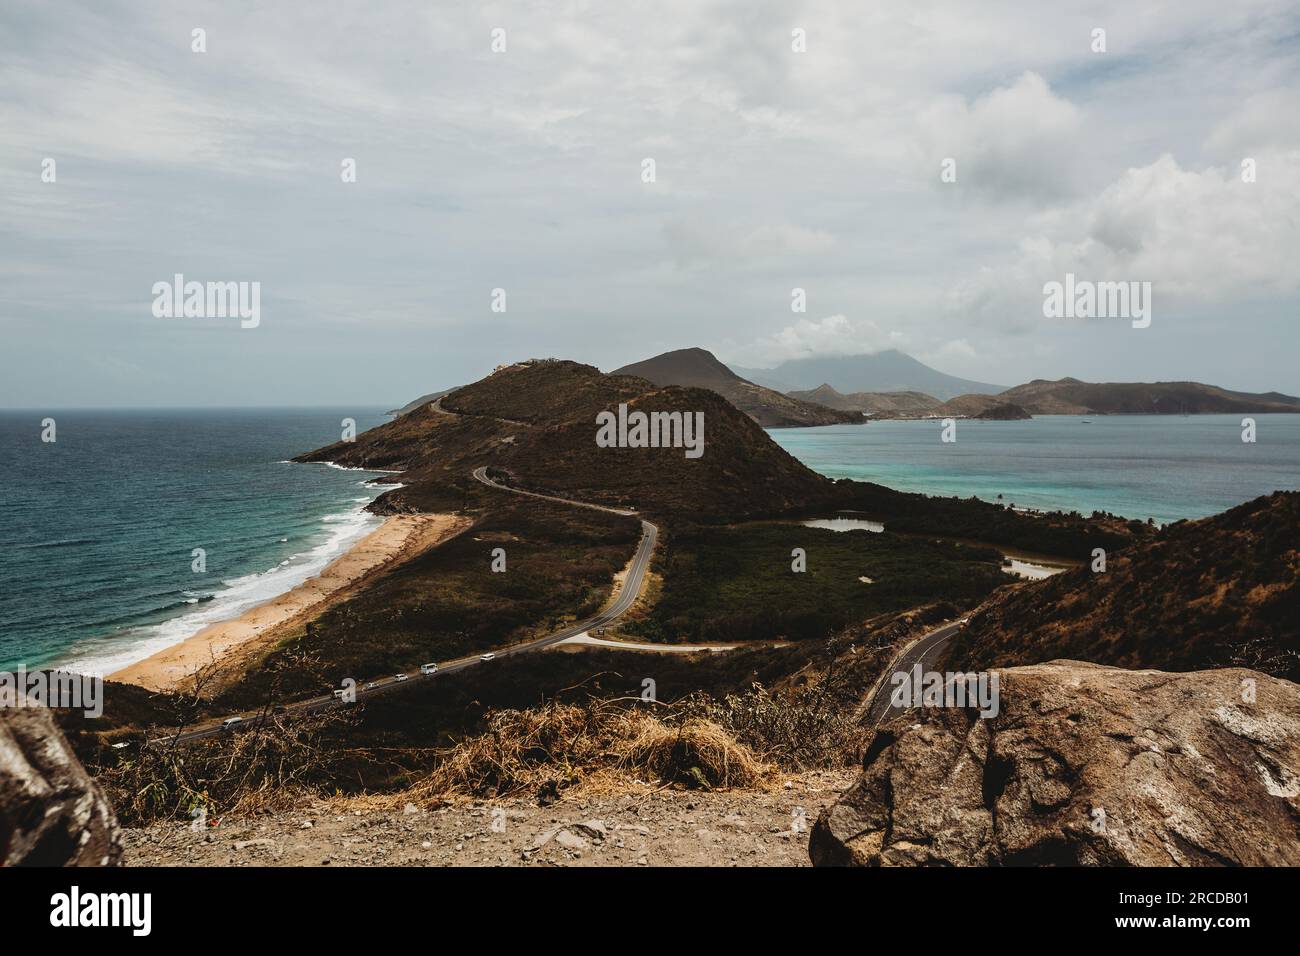 Lush landscape view of St Kitts and Nevis taken from Frigate Bay Stock Photo